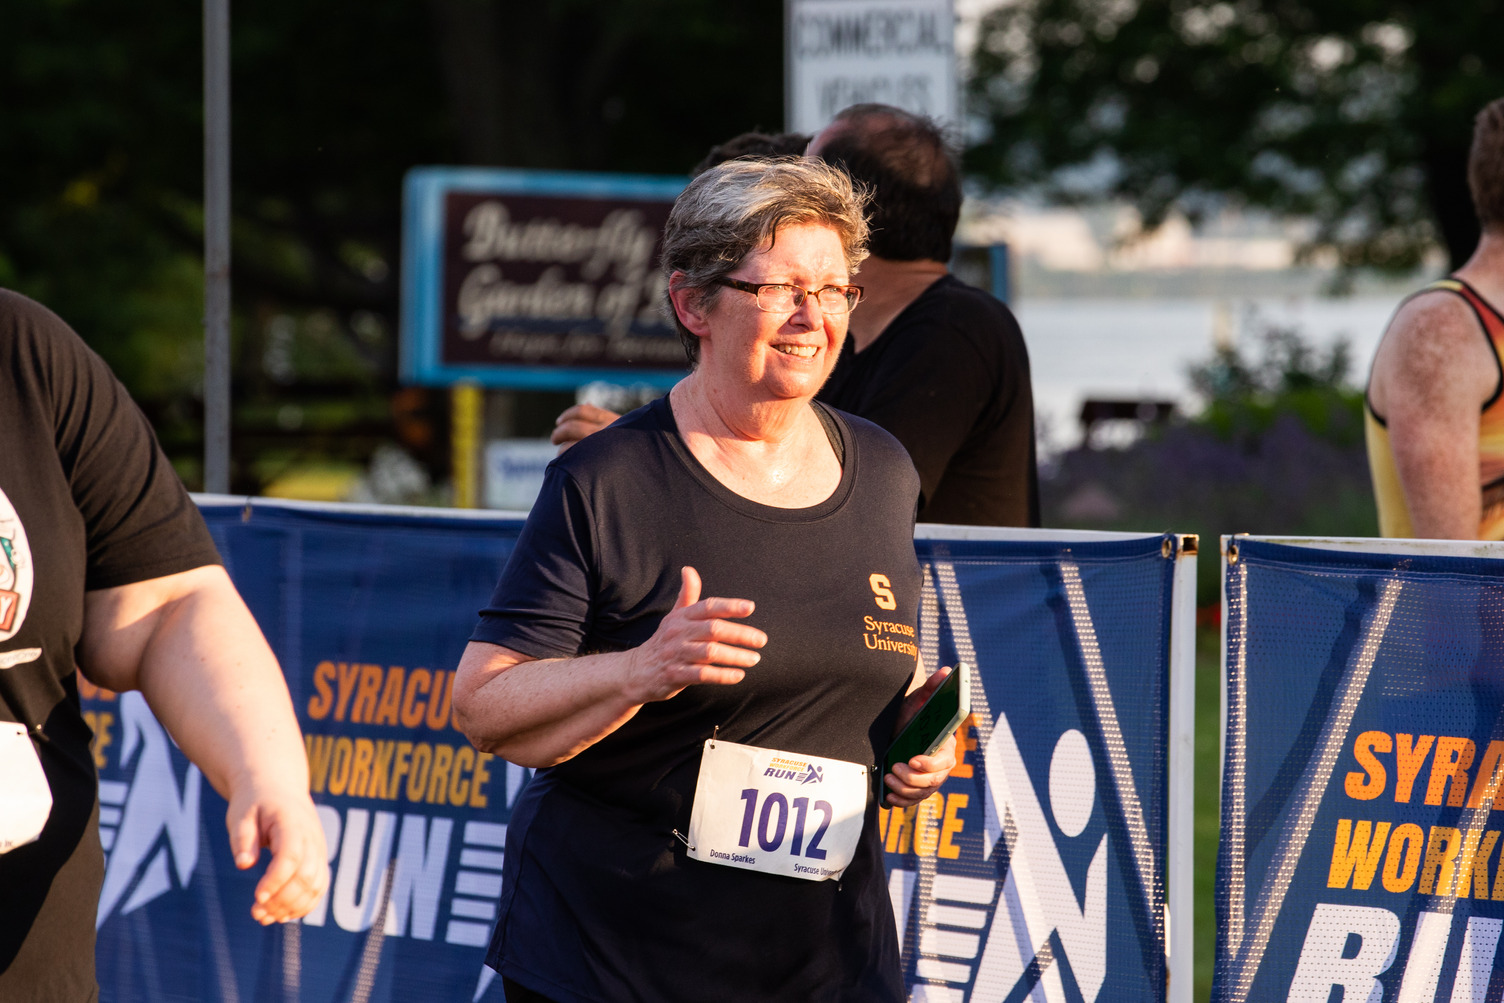 Donna Sparkes on the course at the Syracuse Workforce Run